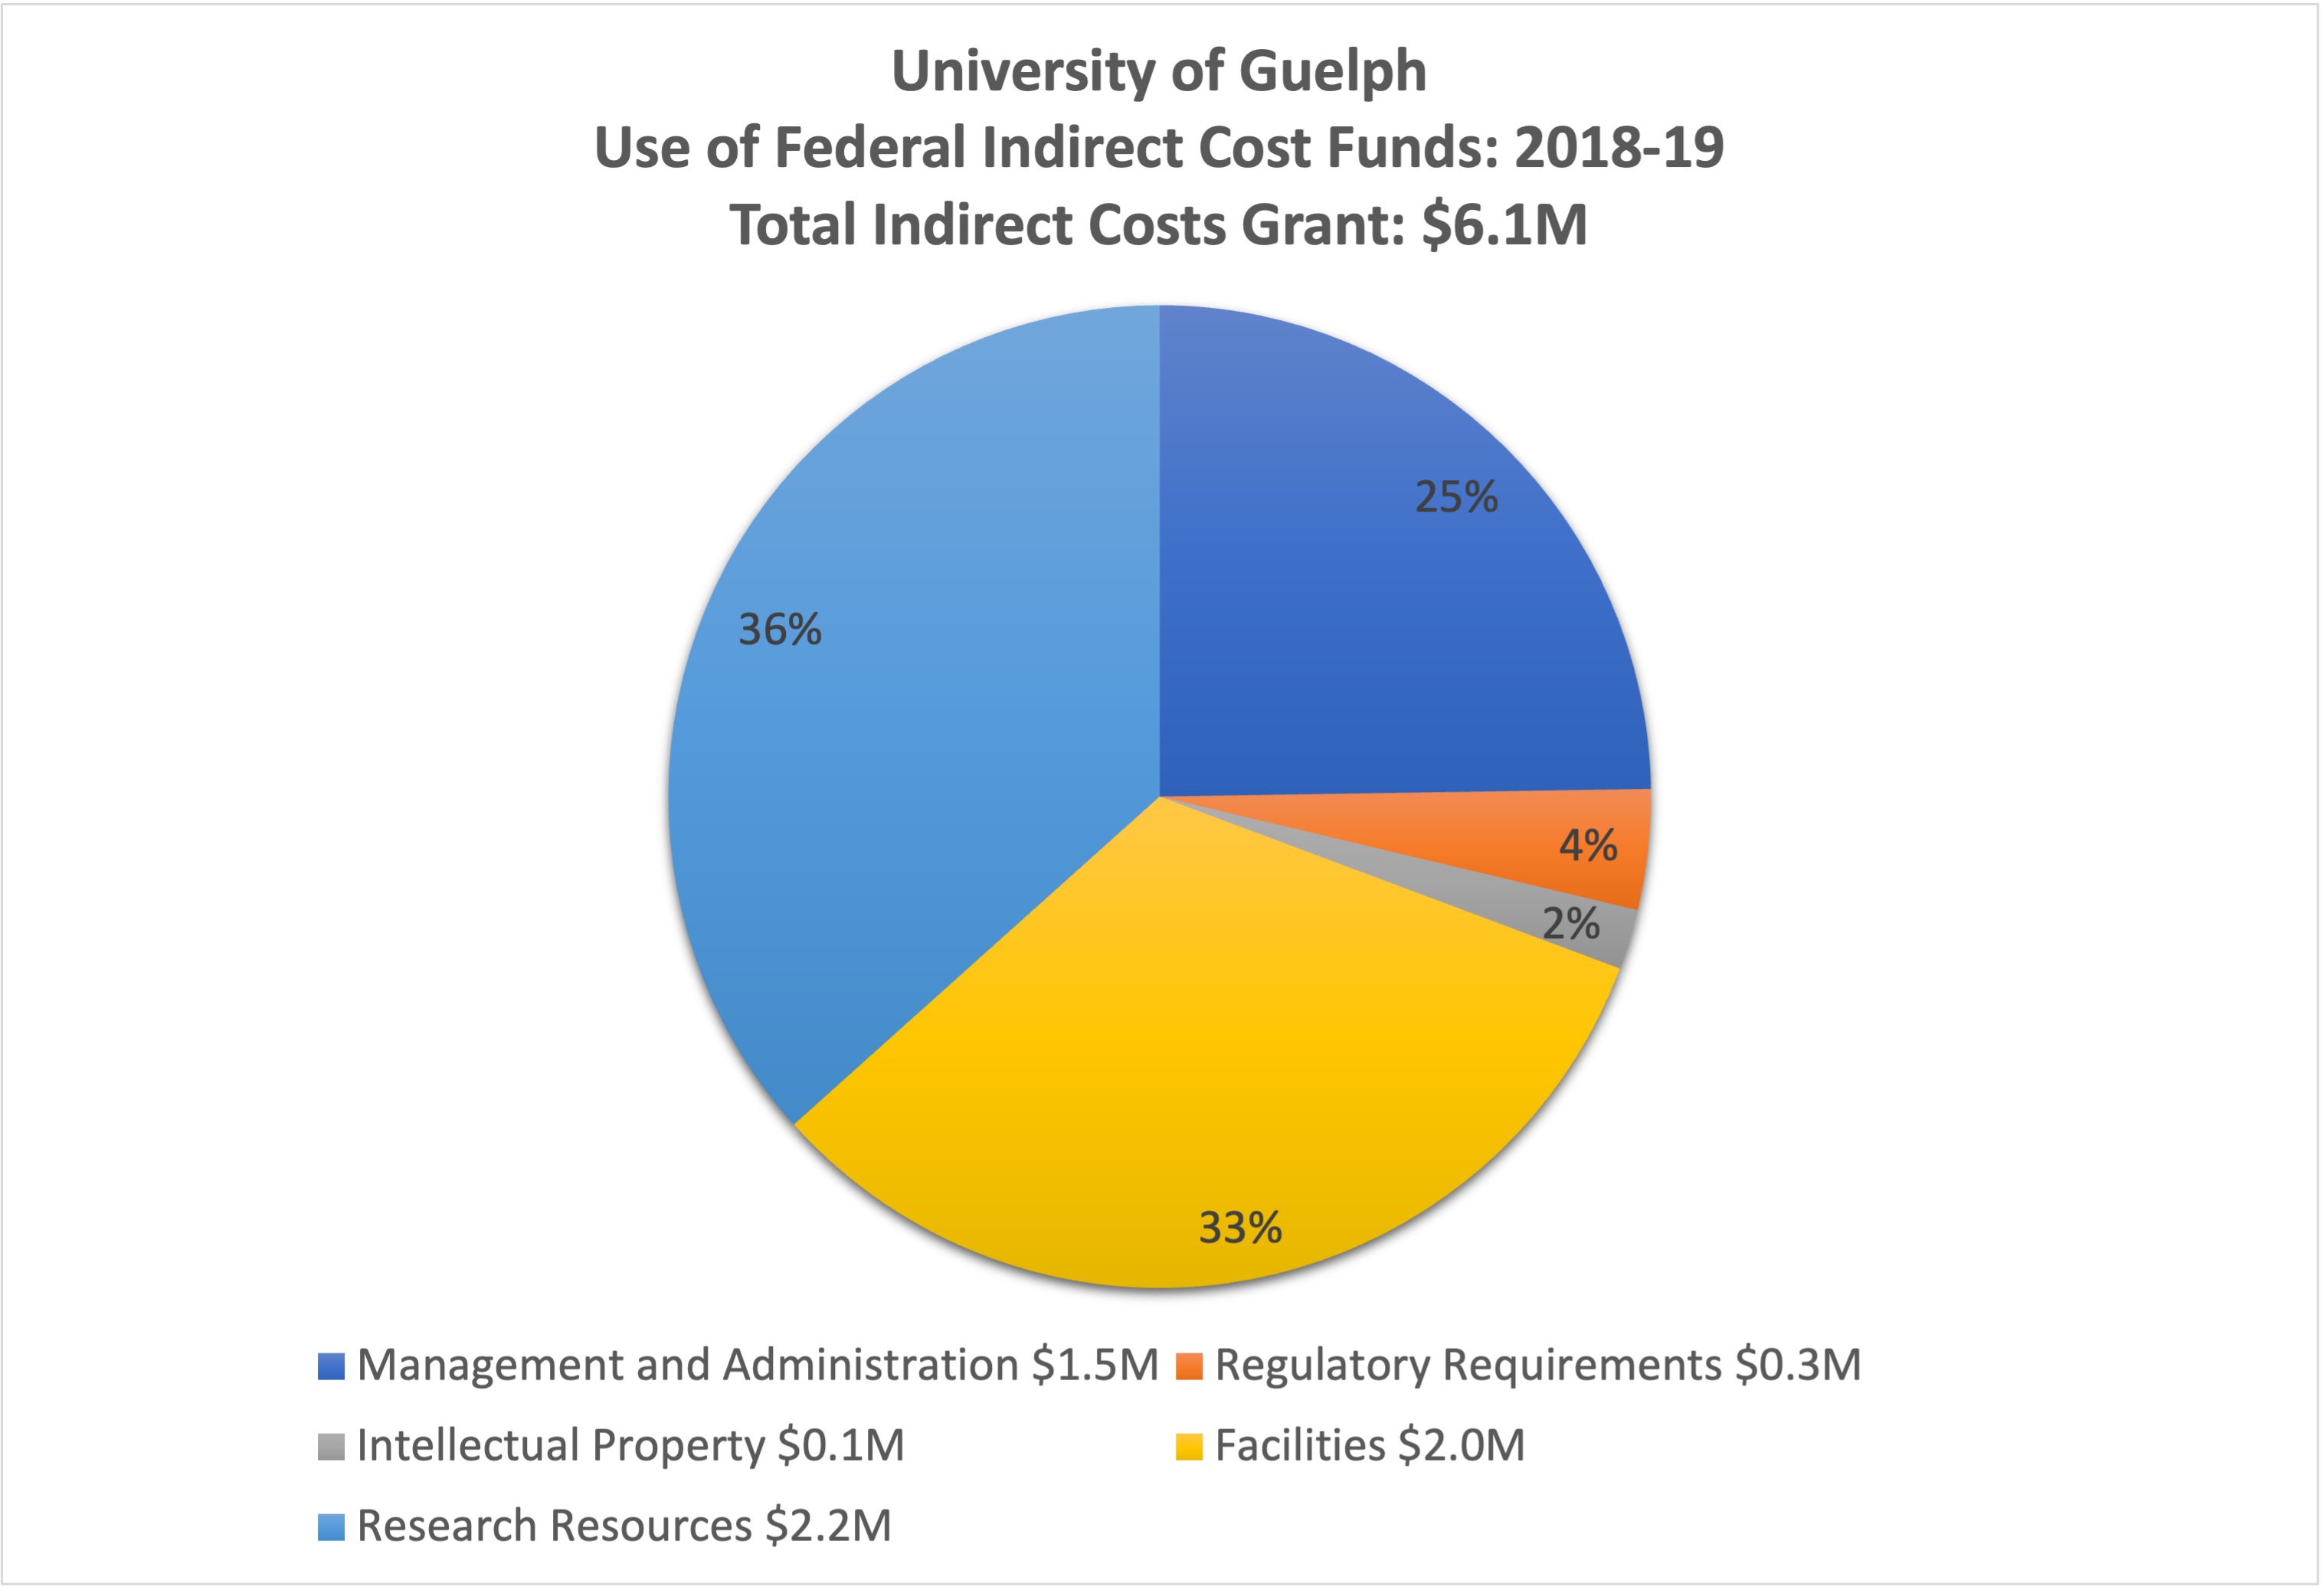 University of Guelph - Use of Federal Indirect Cost Funds: 2018-19 - Total Indirect Costs Grant: $6.1M. Management and Administration - $1.5M. Regulatory Requirements - $0.3M. Intellectual Property - $0.1M. Facilities - $2.0M. Research Resources $2.2M.